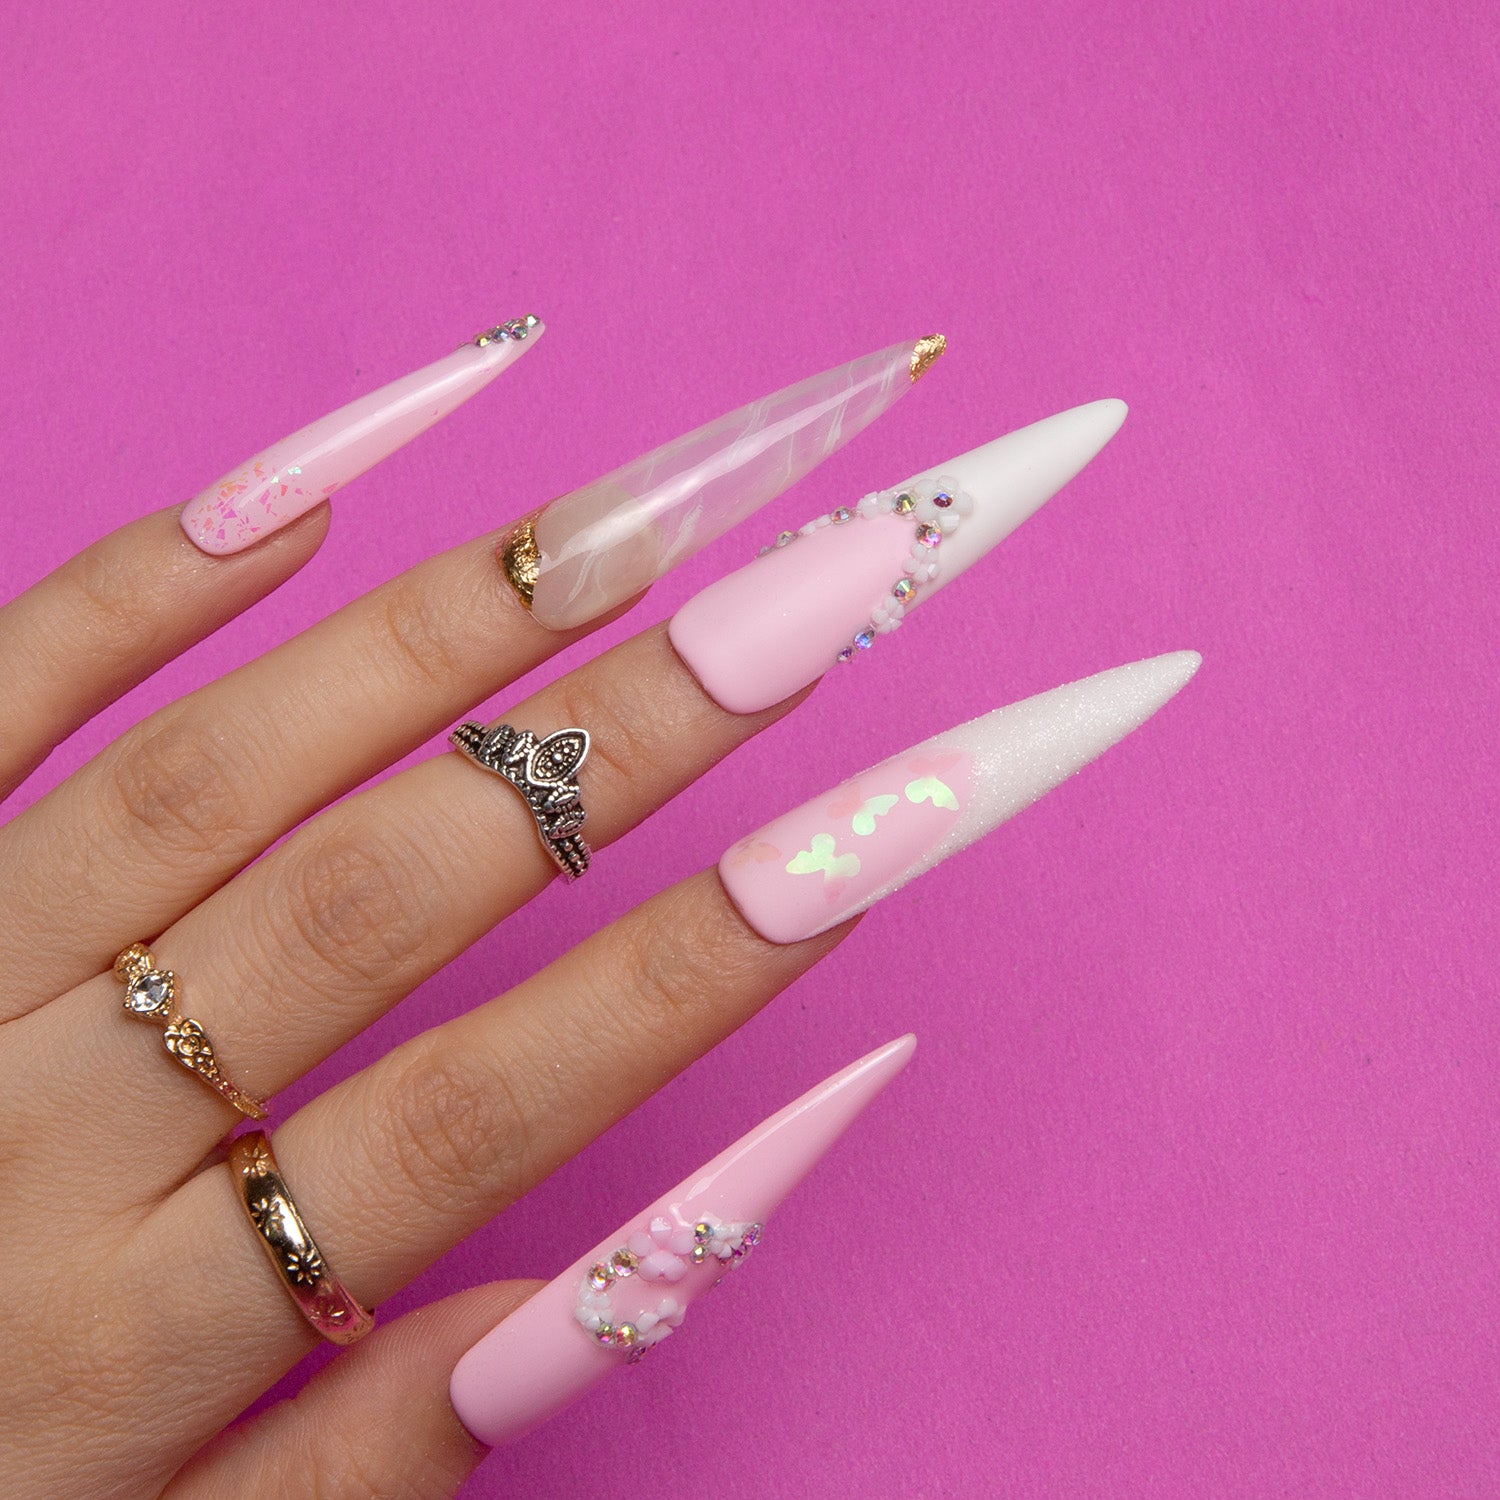 Stiletto-shaped press-on nails in light pink with heart-shaped flowers, French tips, beads, and glitter, ideal for bridal wear, against a pink background.